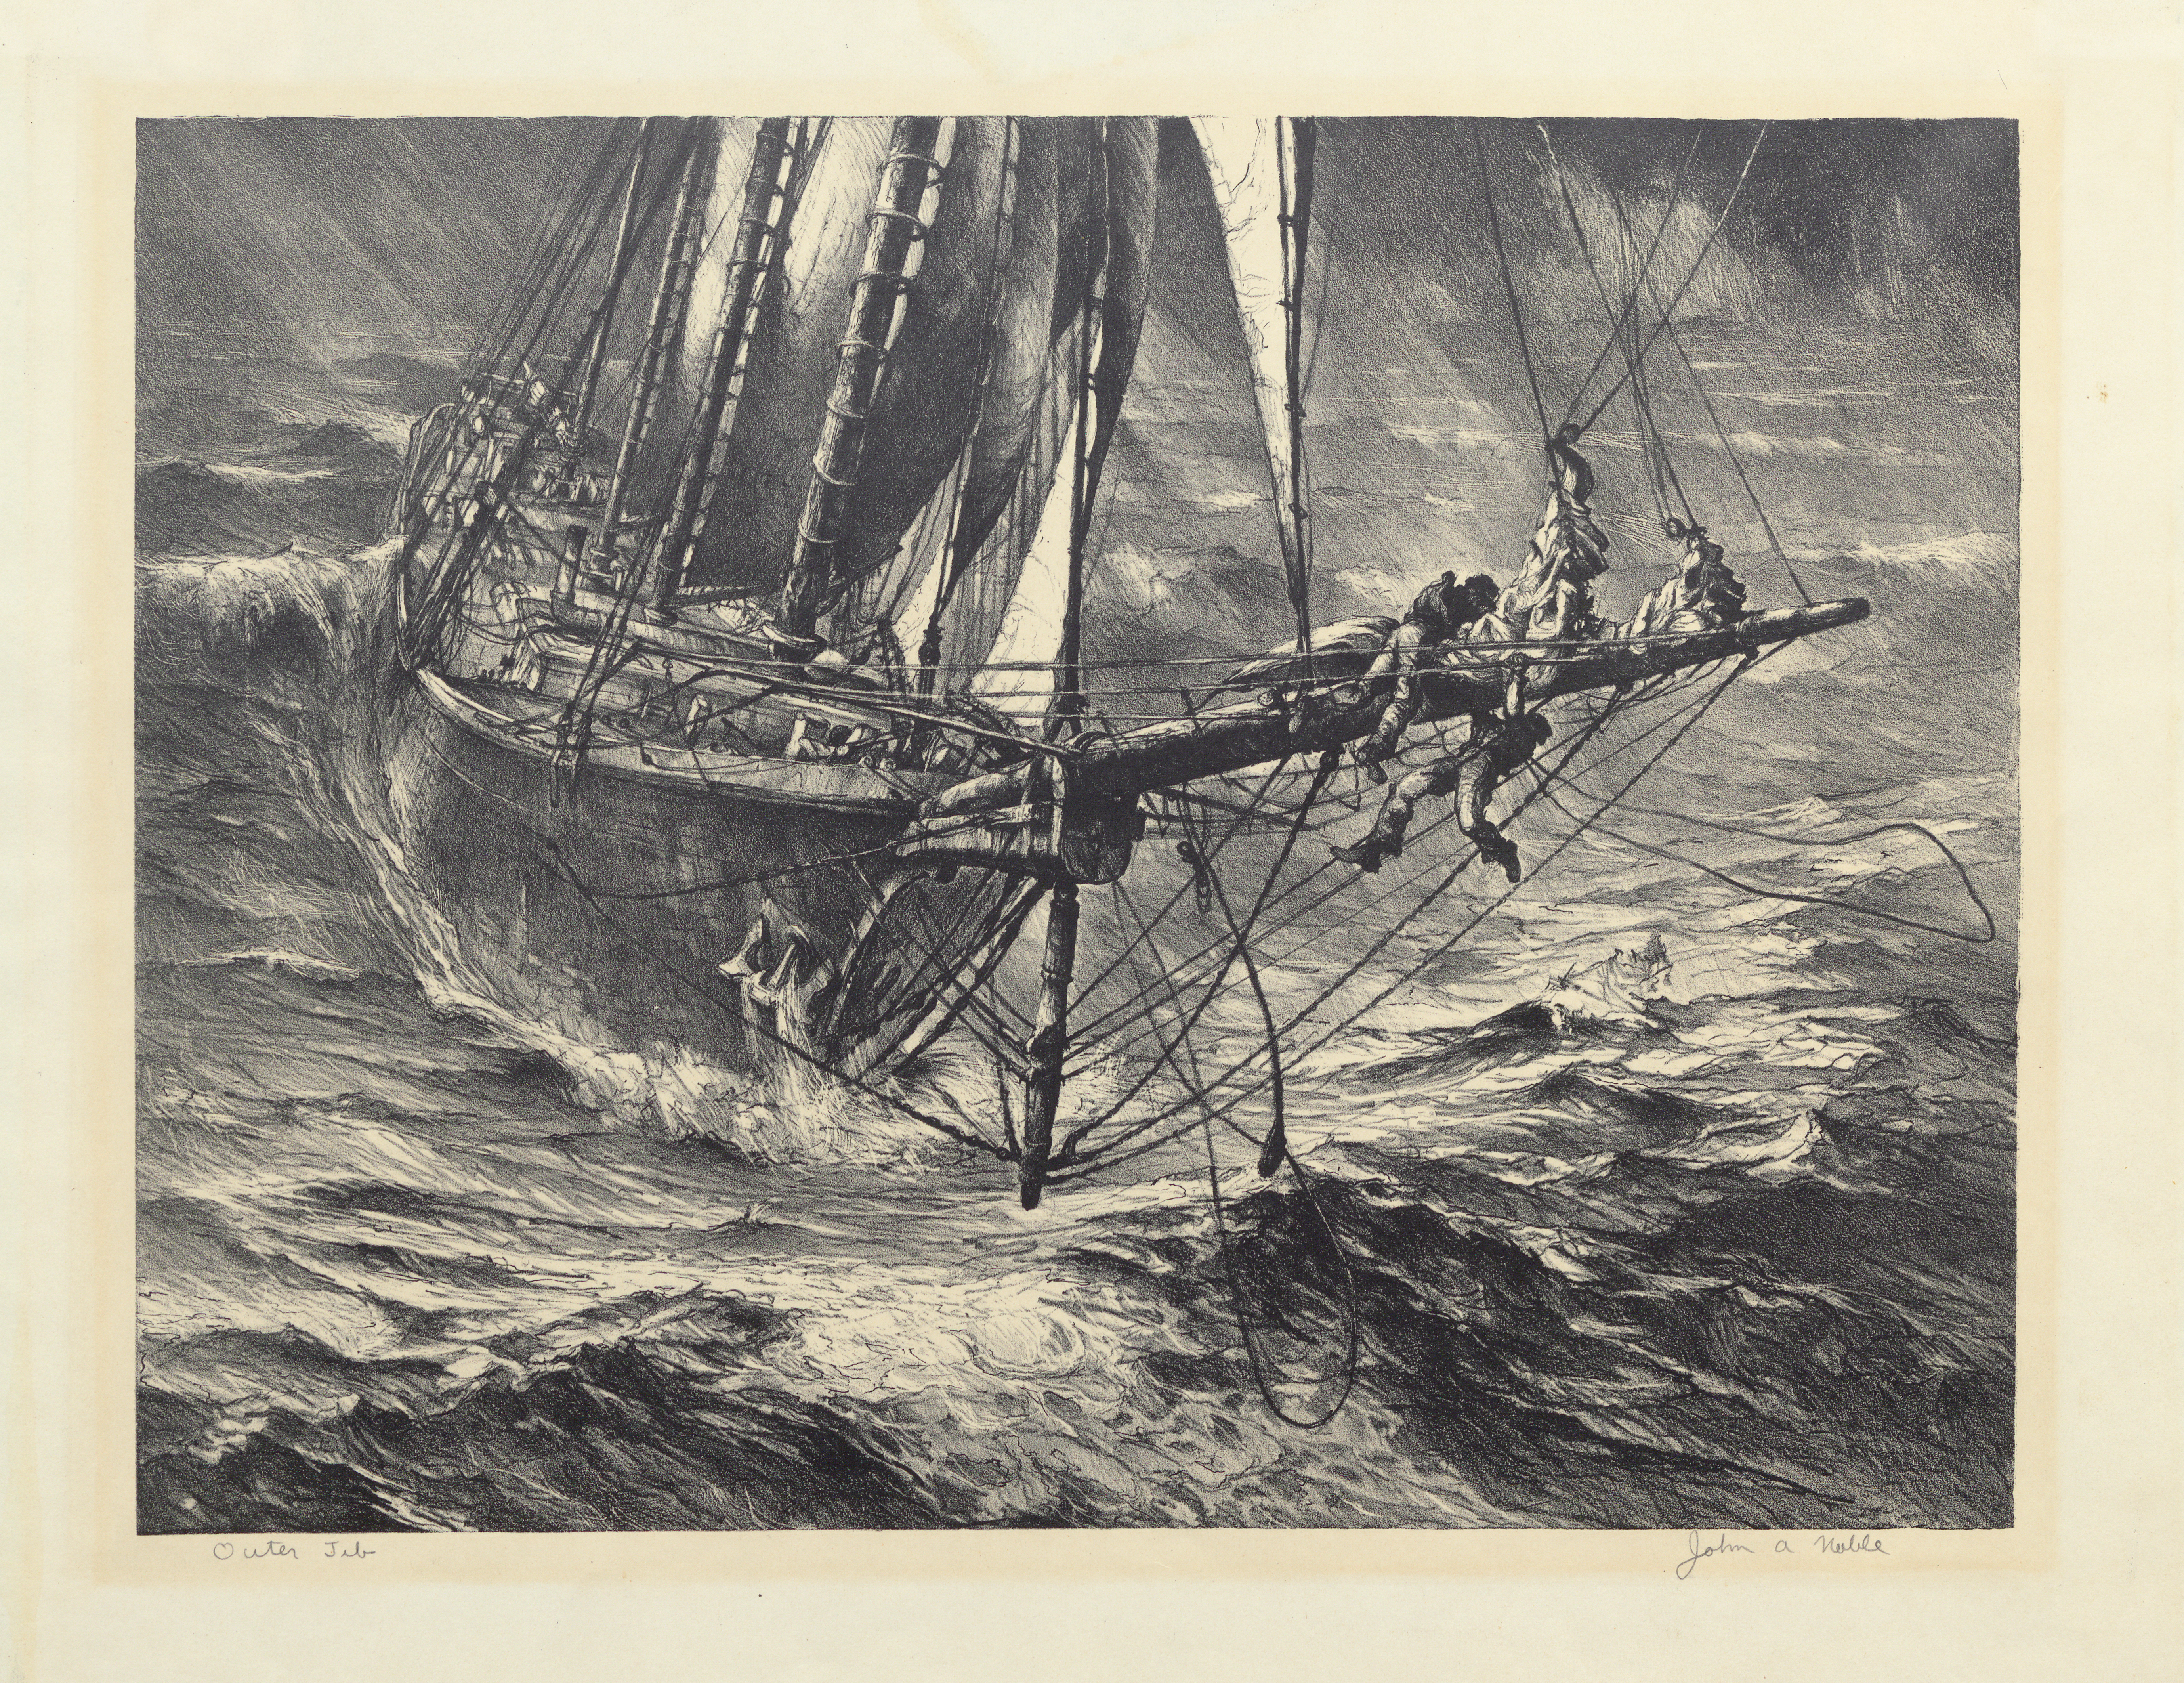 Outer Jib from Schooner’s Progress Series, John A. Noble, before 1937.